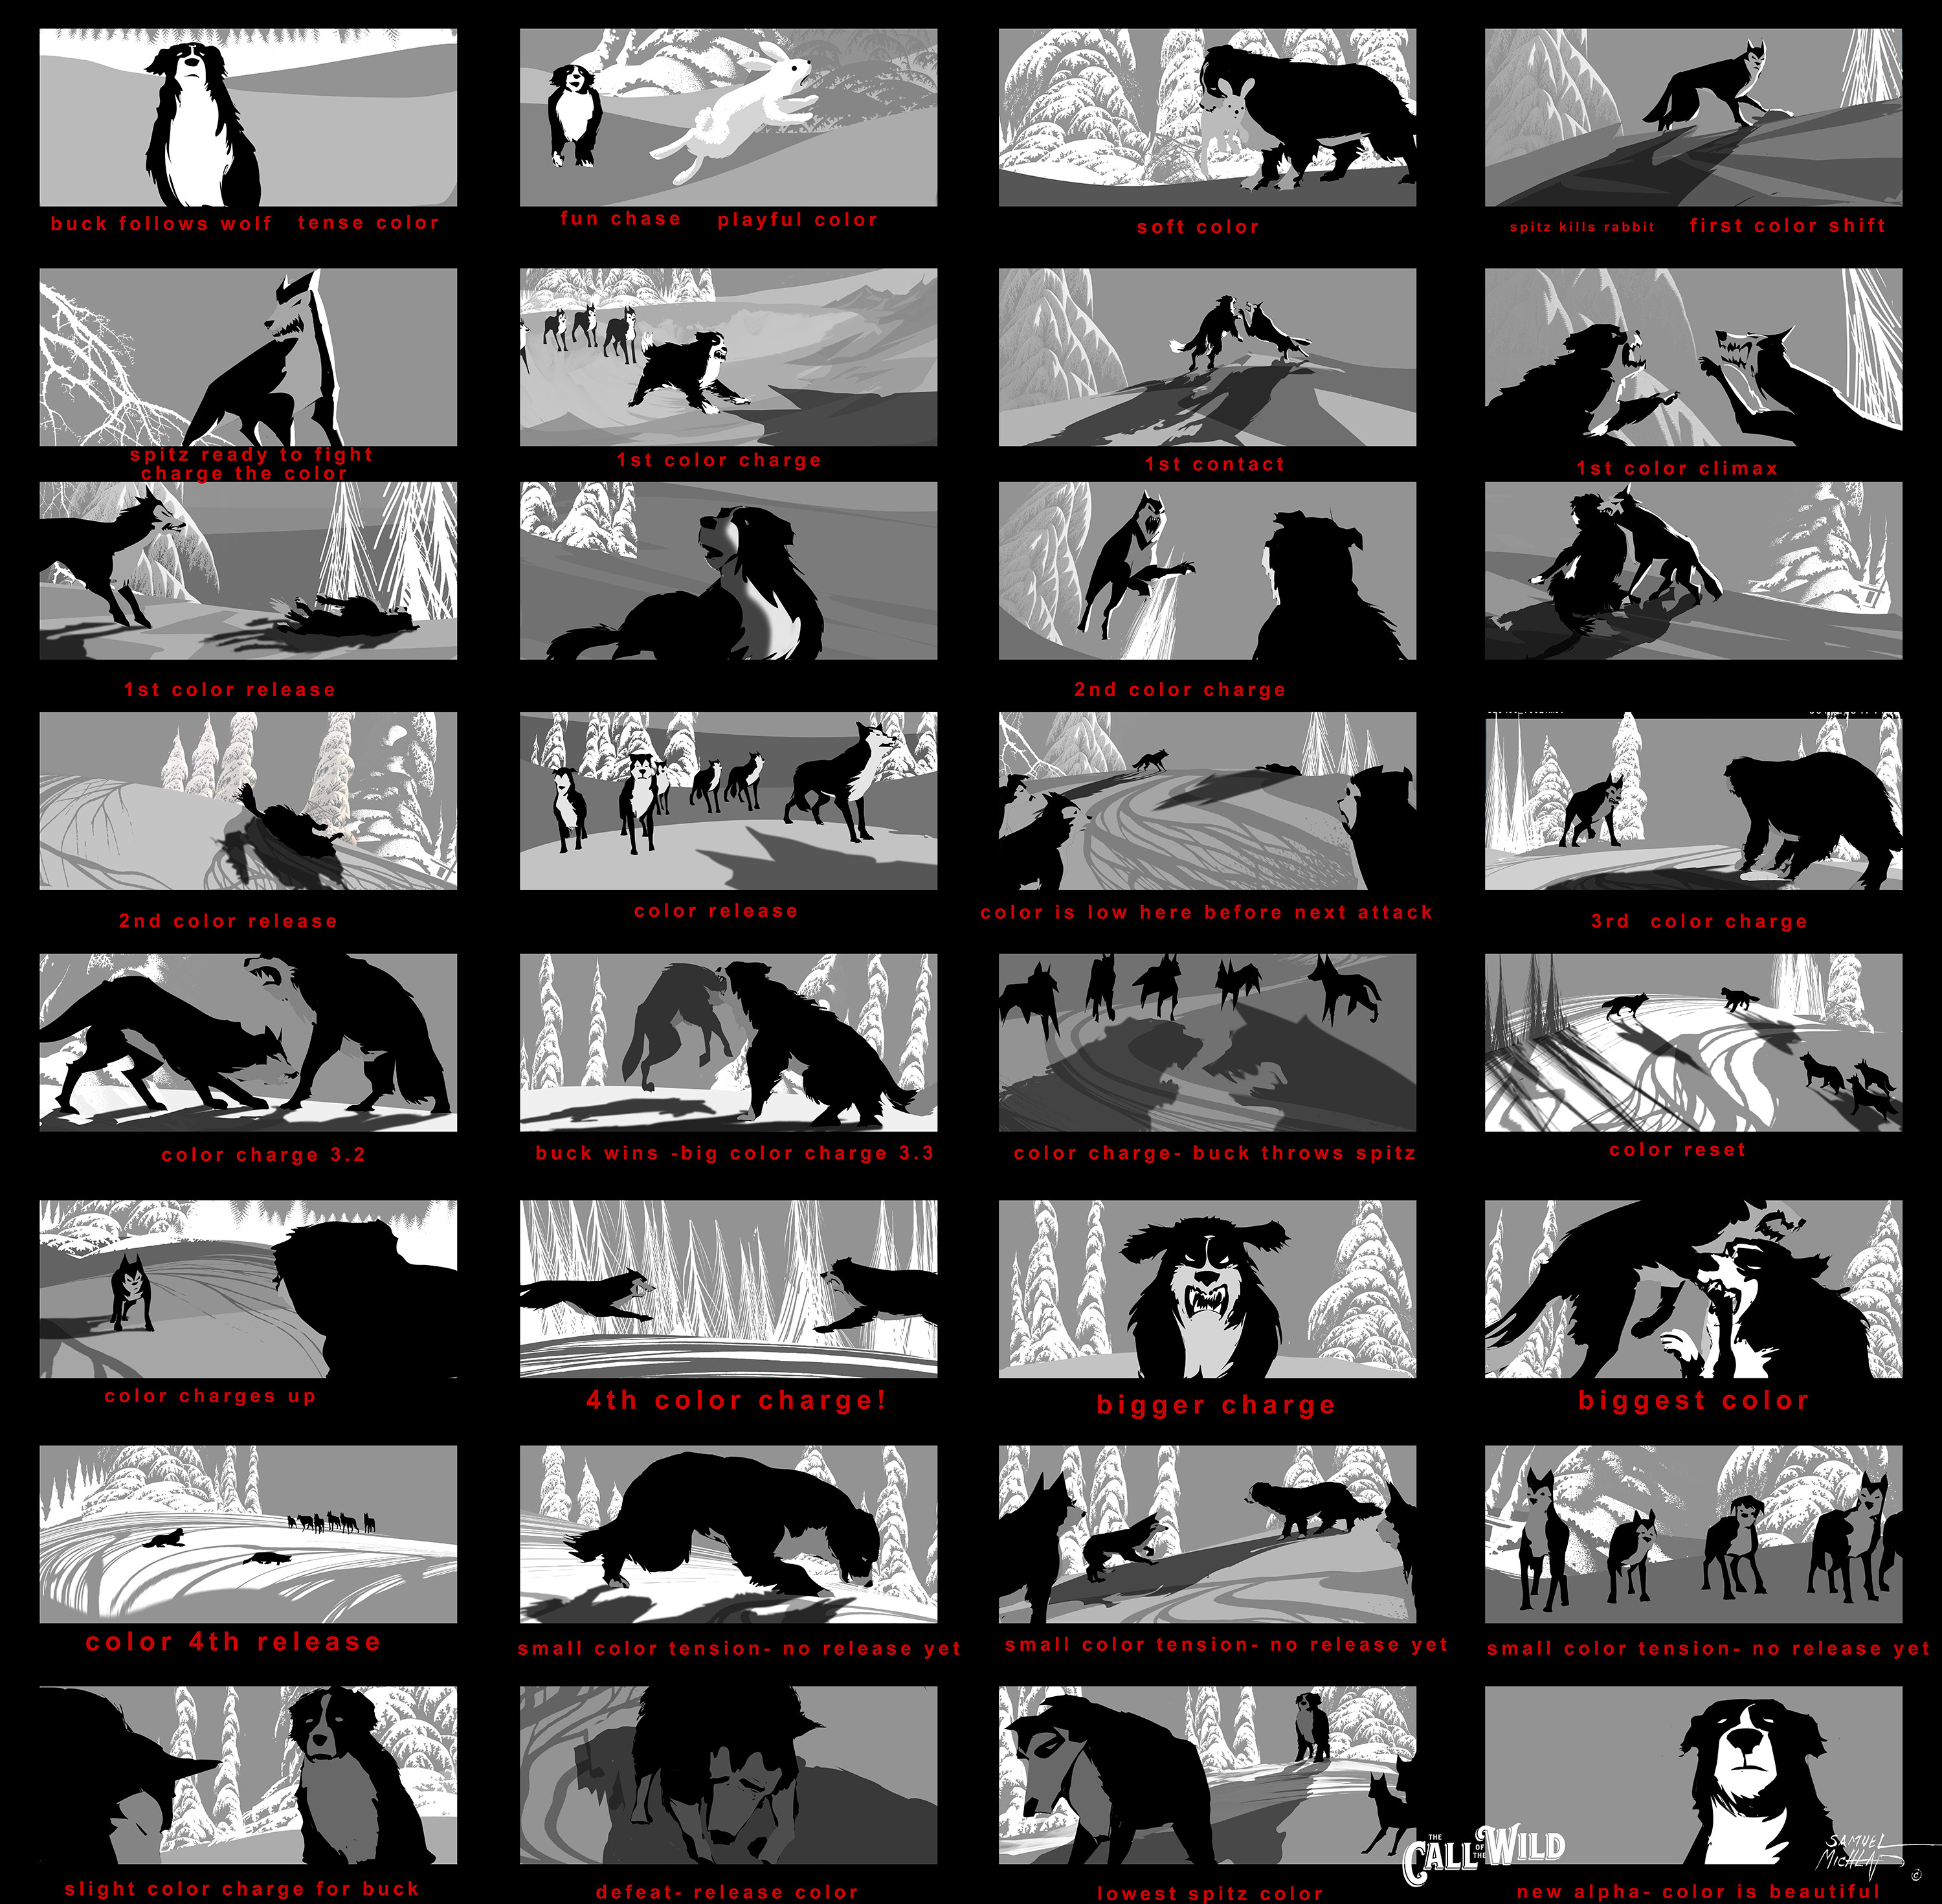 Spitz v Buck fight sequence staging